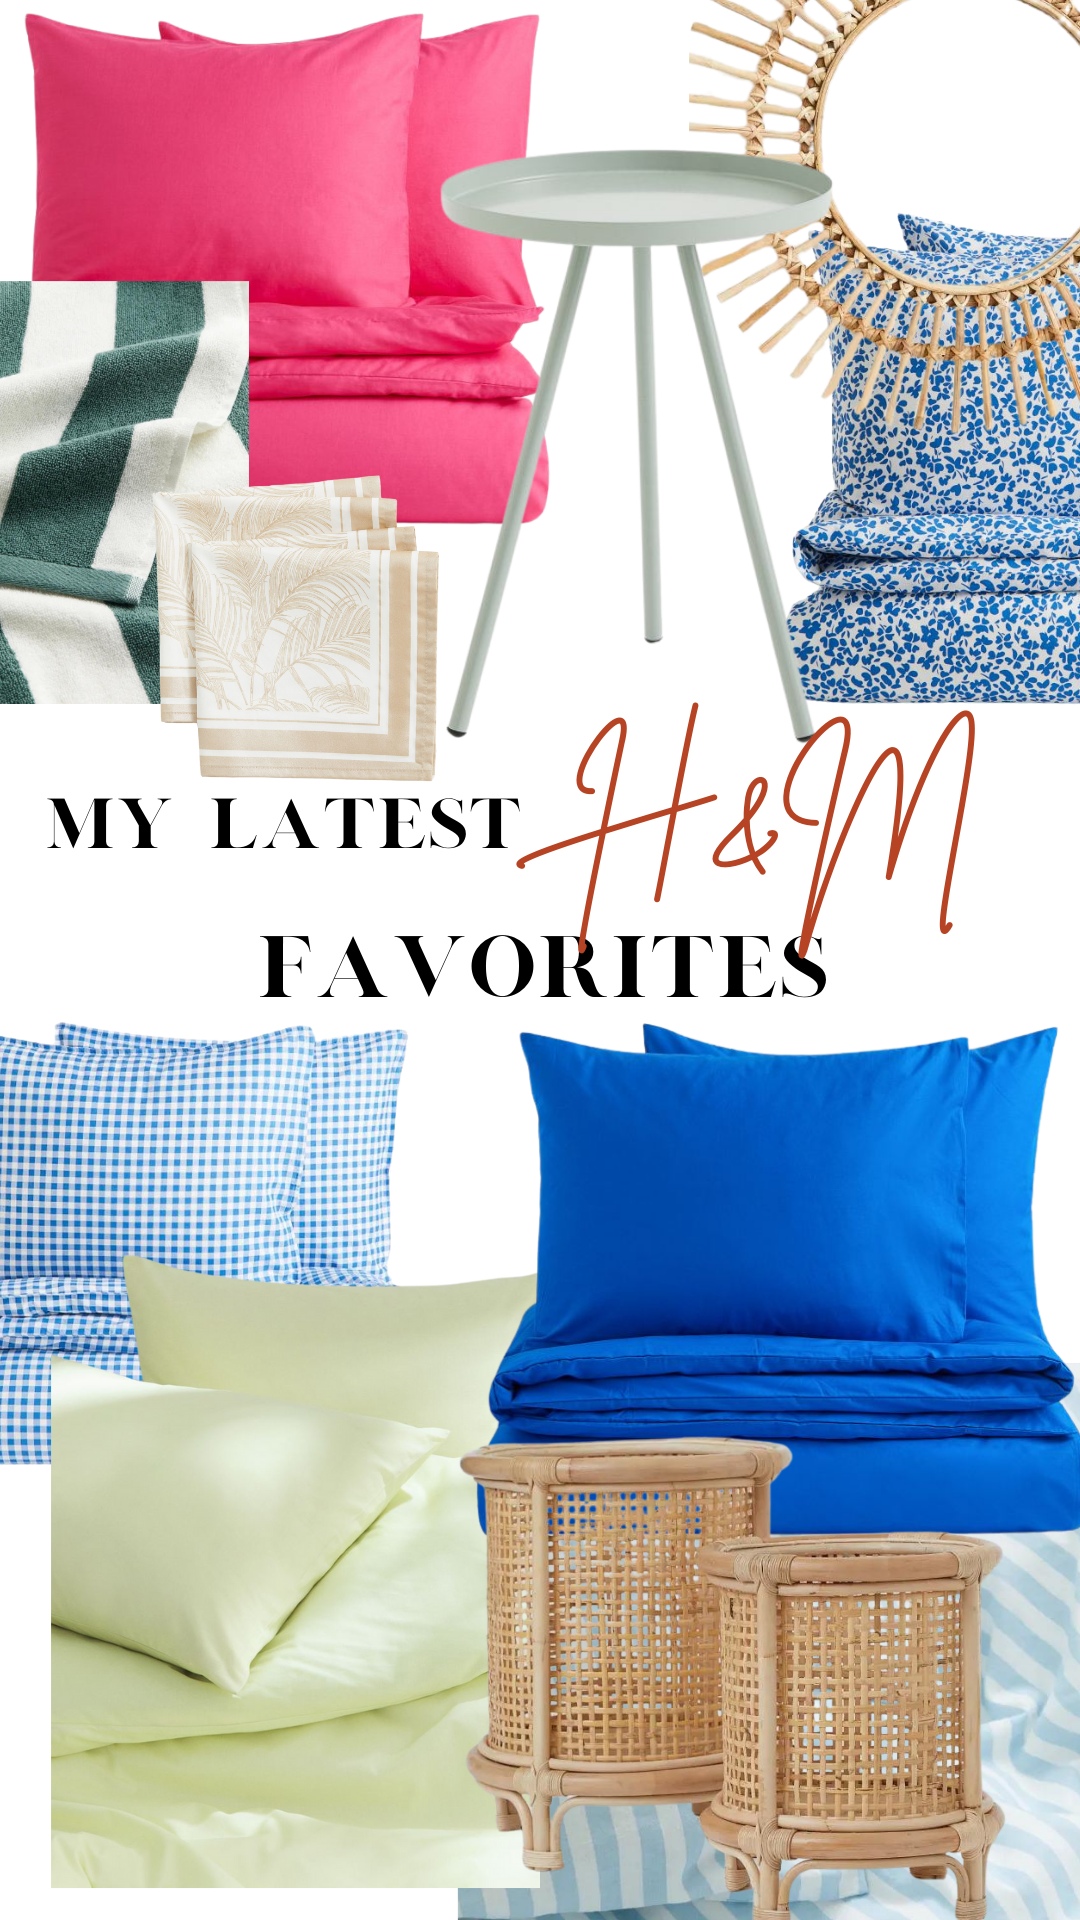 My Latest H&M Home Favorites